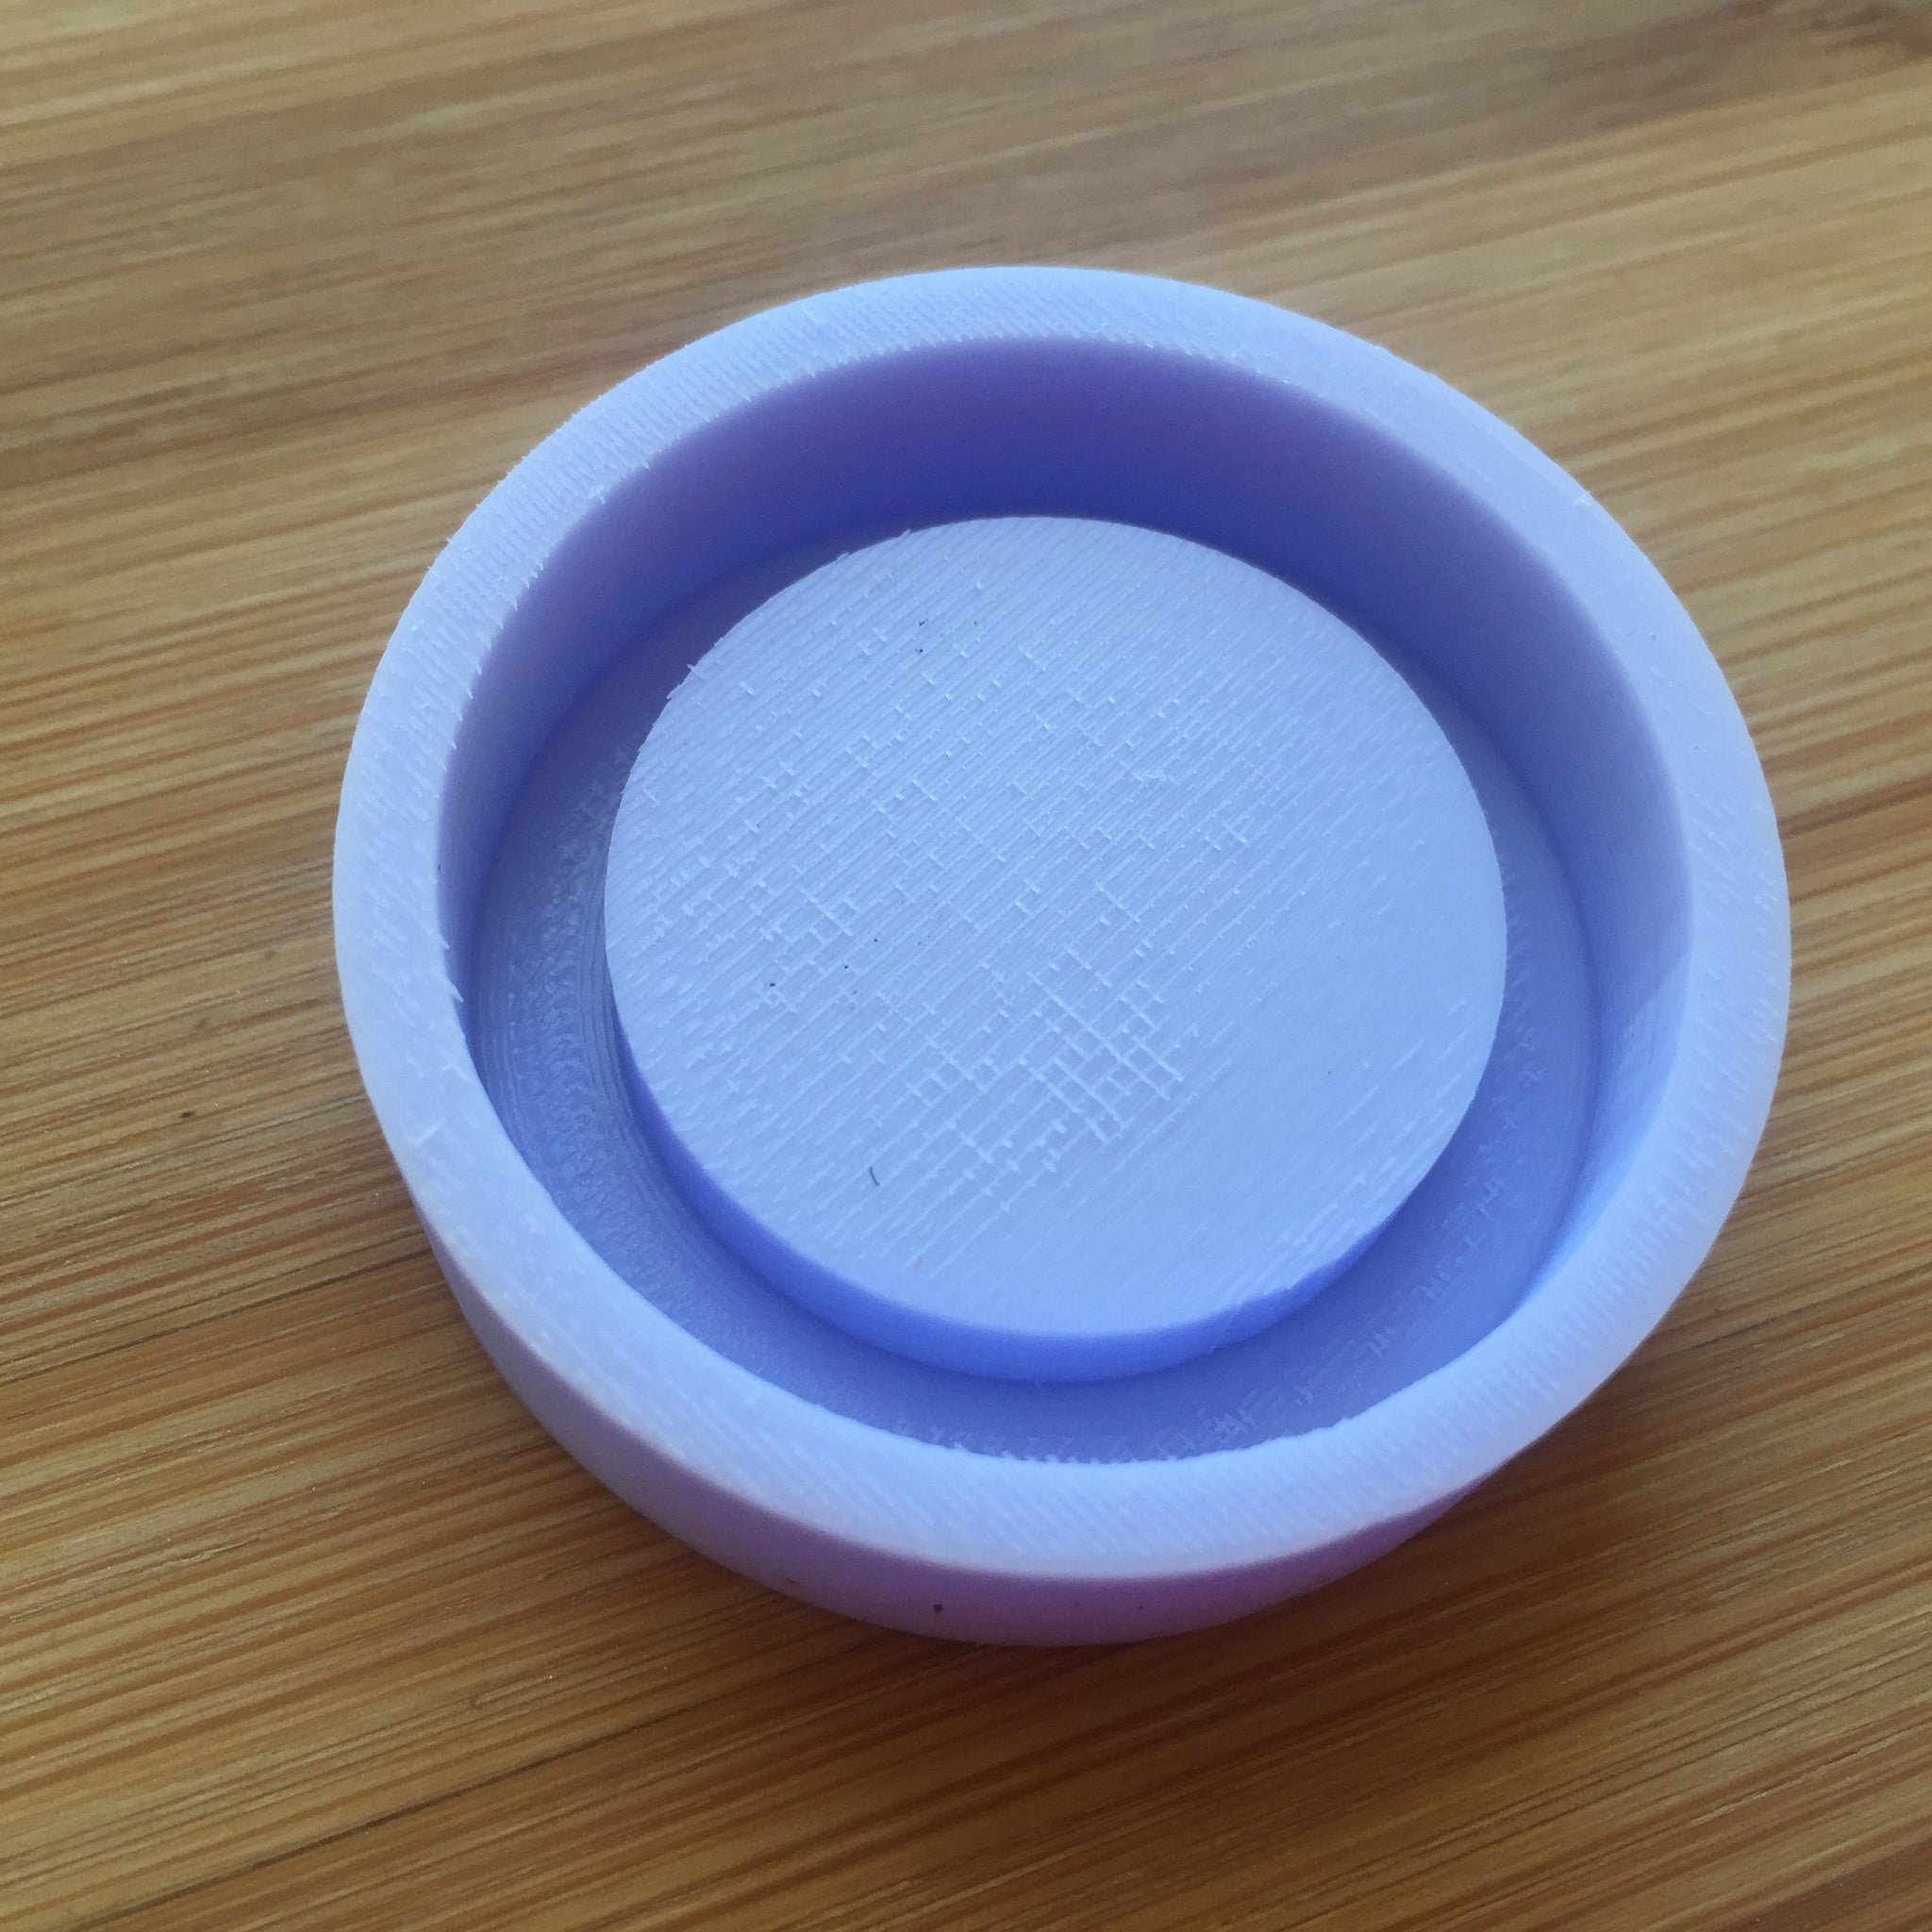 Shaker Silicone Mold or Cover